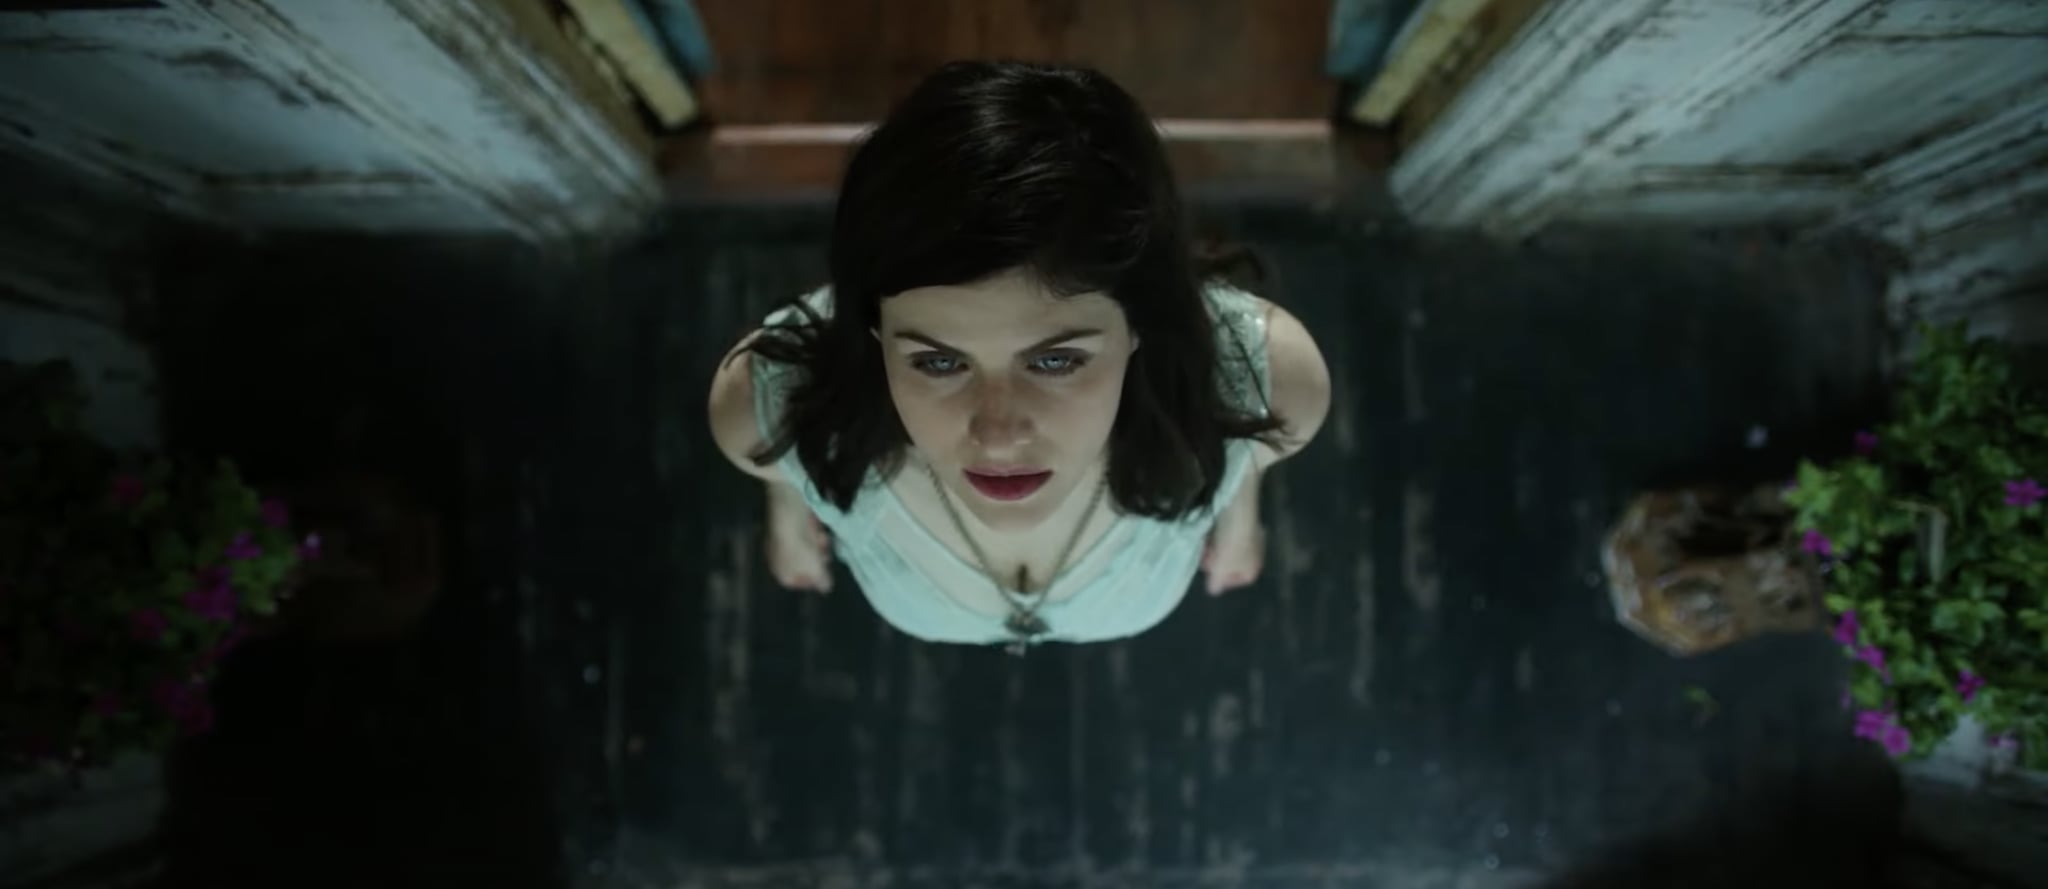 Alexandra Daddario Discovers She’s a Witch in Haunting “Mayfair Witches” Trailer